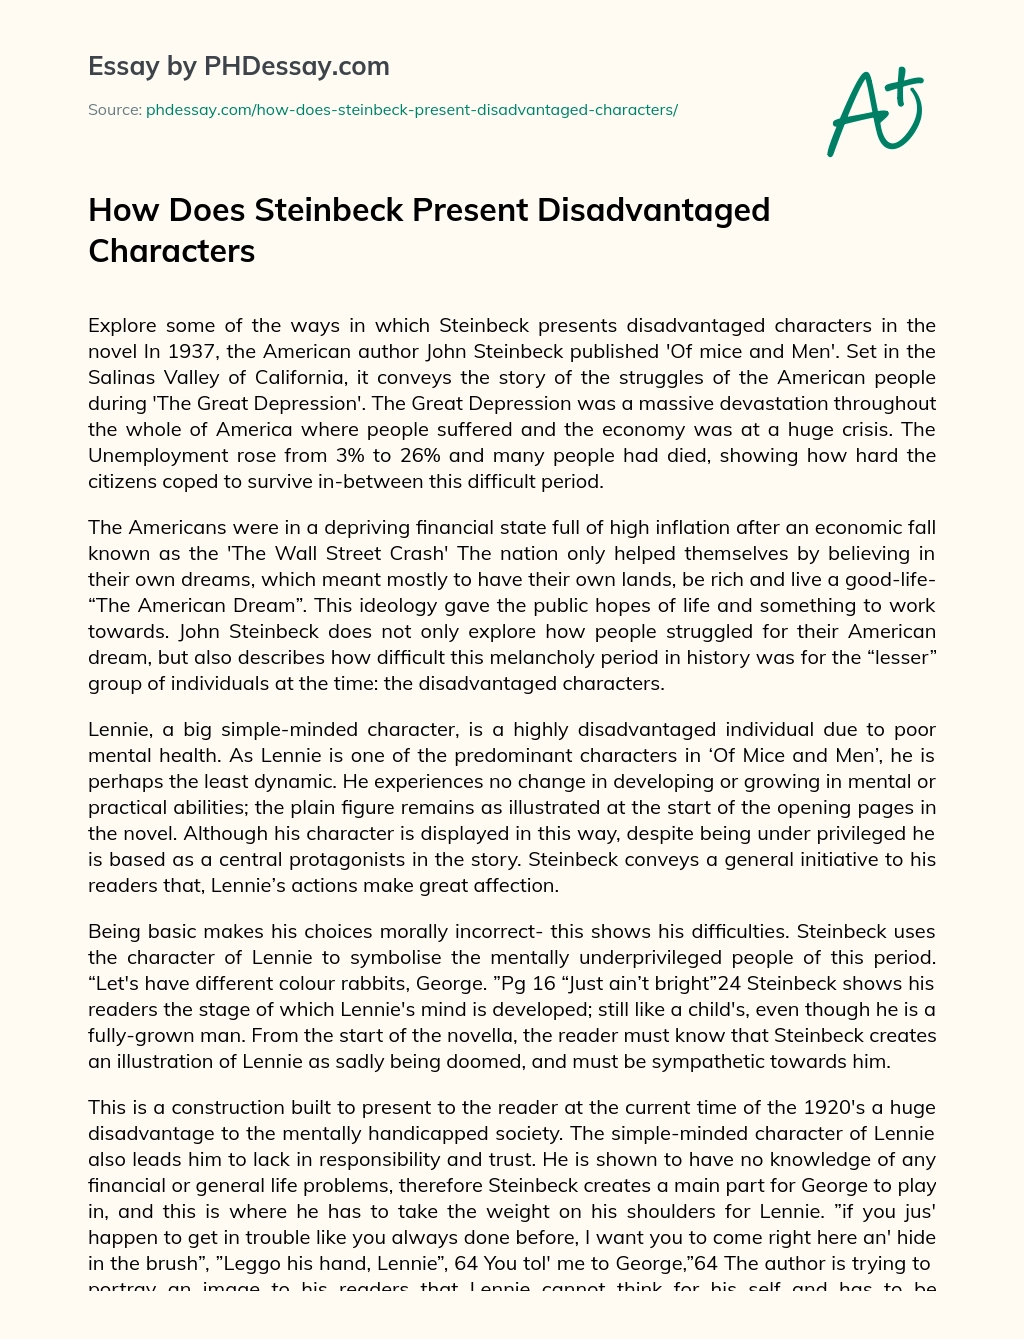 How Does Steinbeck Present Disadvantaged Characters essay